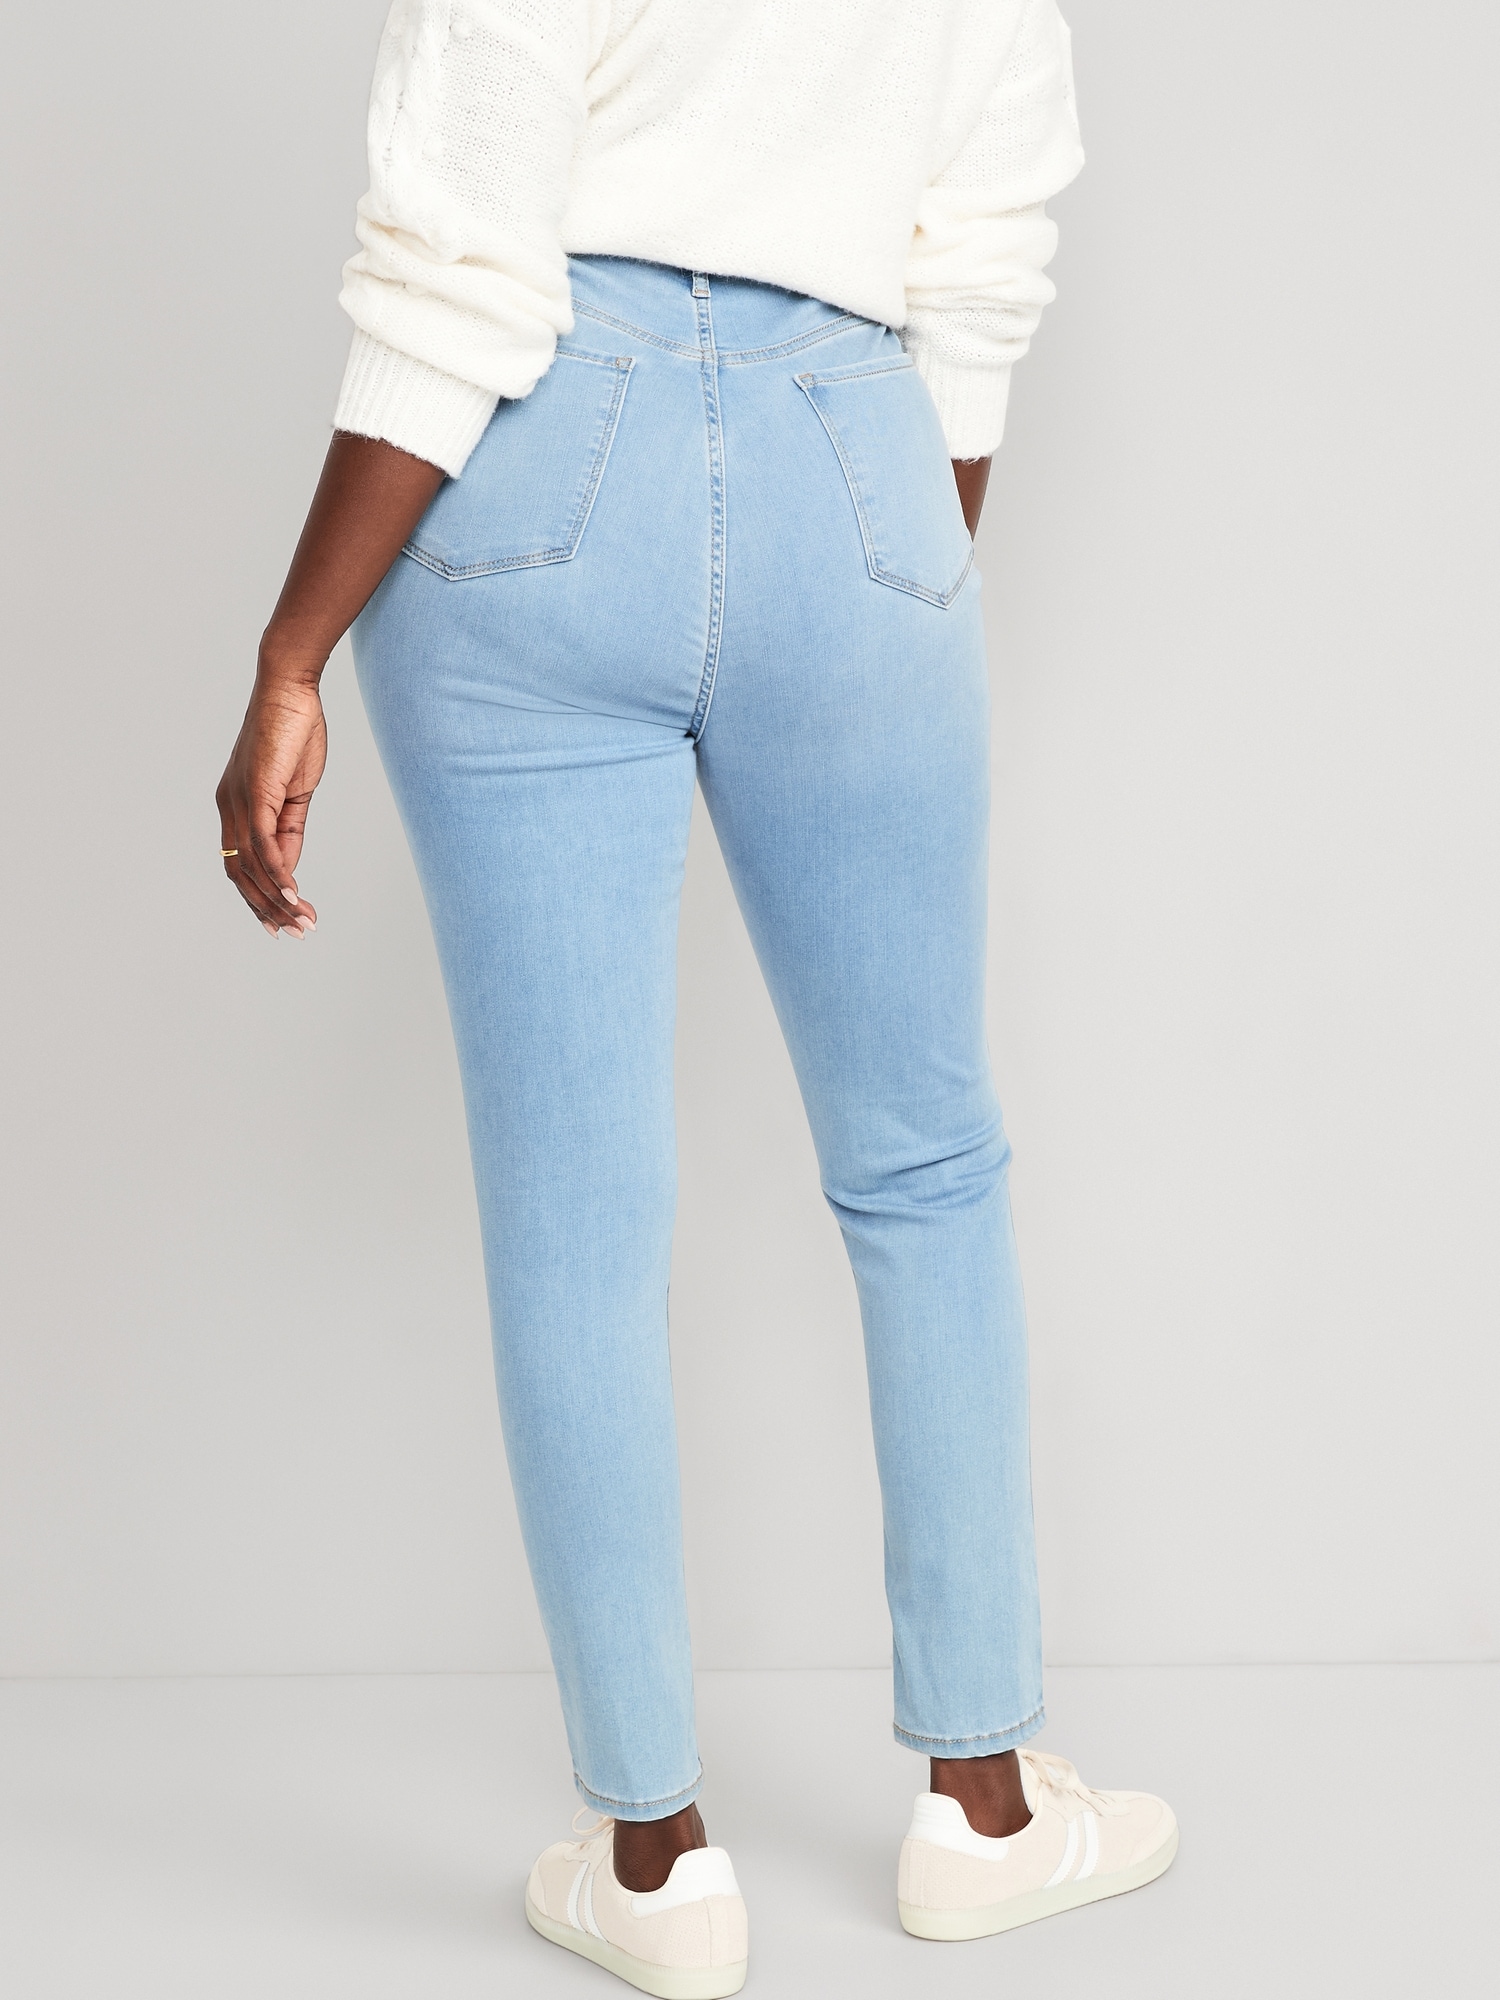 FitsYou 3-Sizes-in-1 Extra High-Waisted Rockstar Super-Skinny for | Old Navy